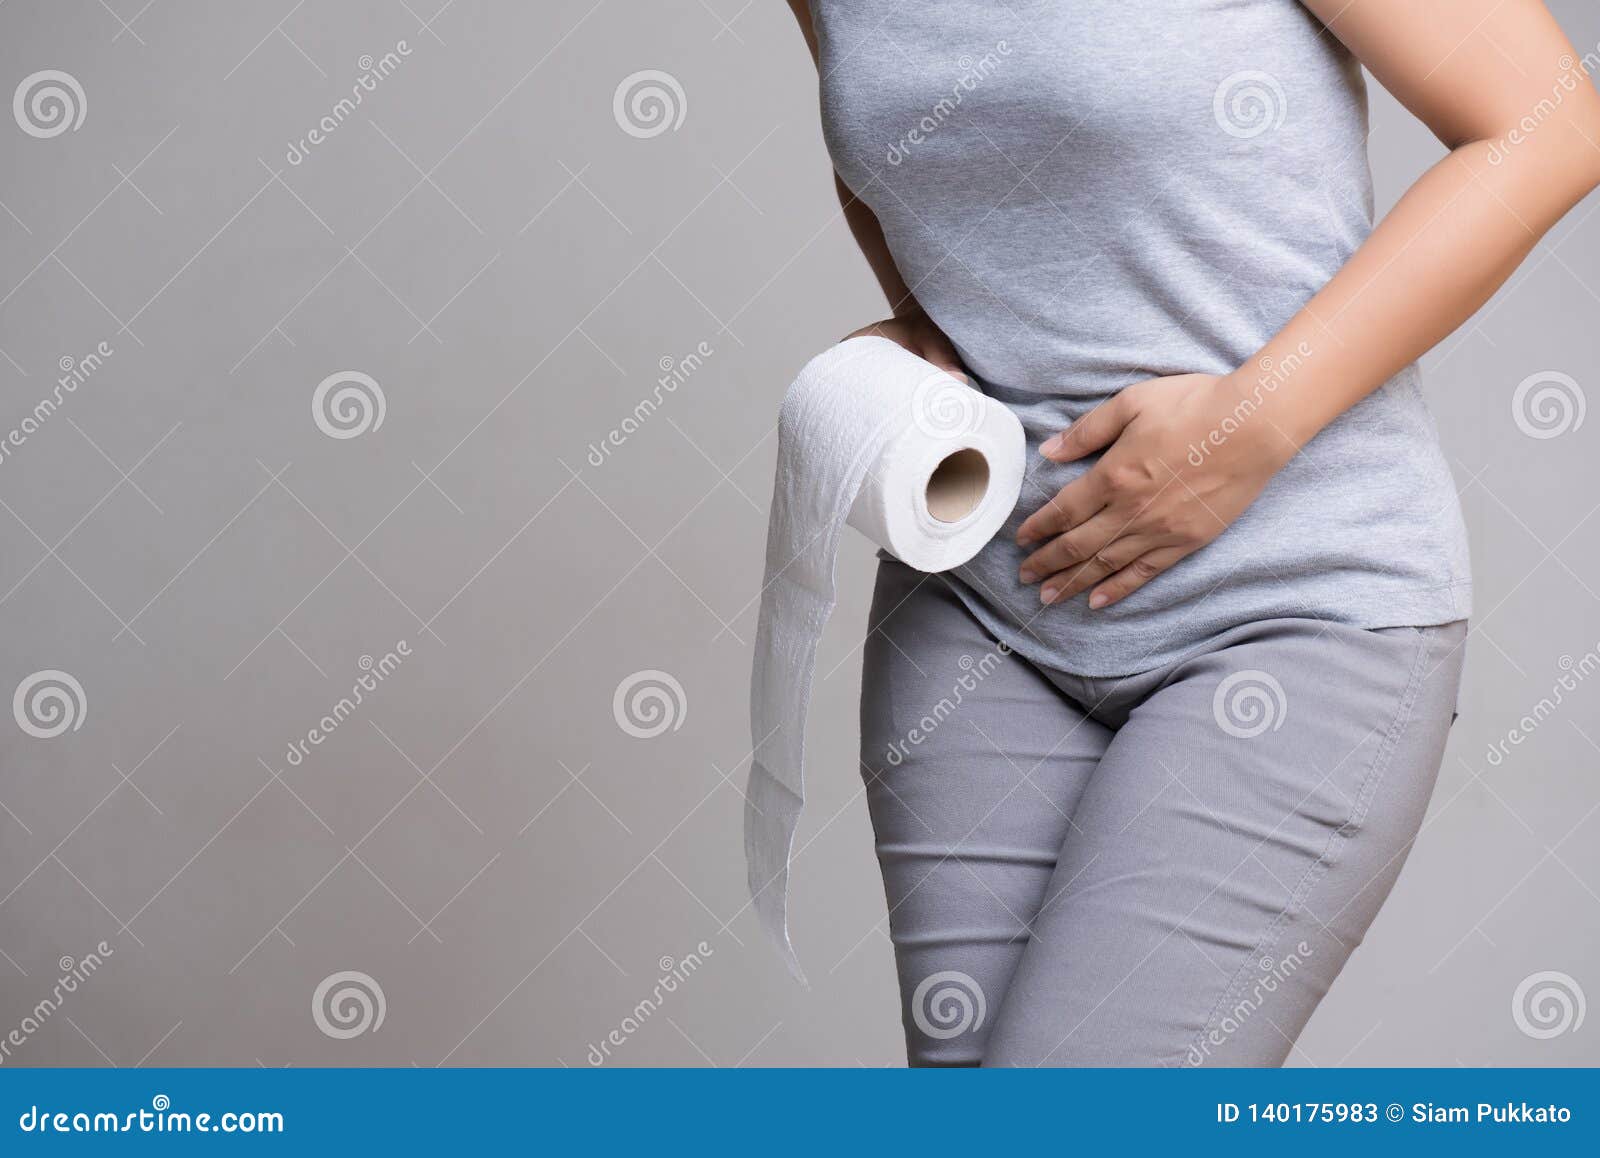 woman hand holding her crotch lower abdomen and tissue or toilet paper roll. disorder, diarrhea, incontinence. healthcare concept